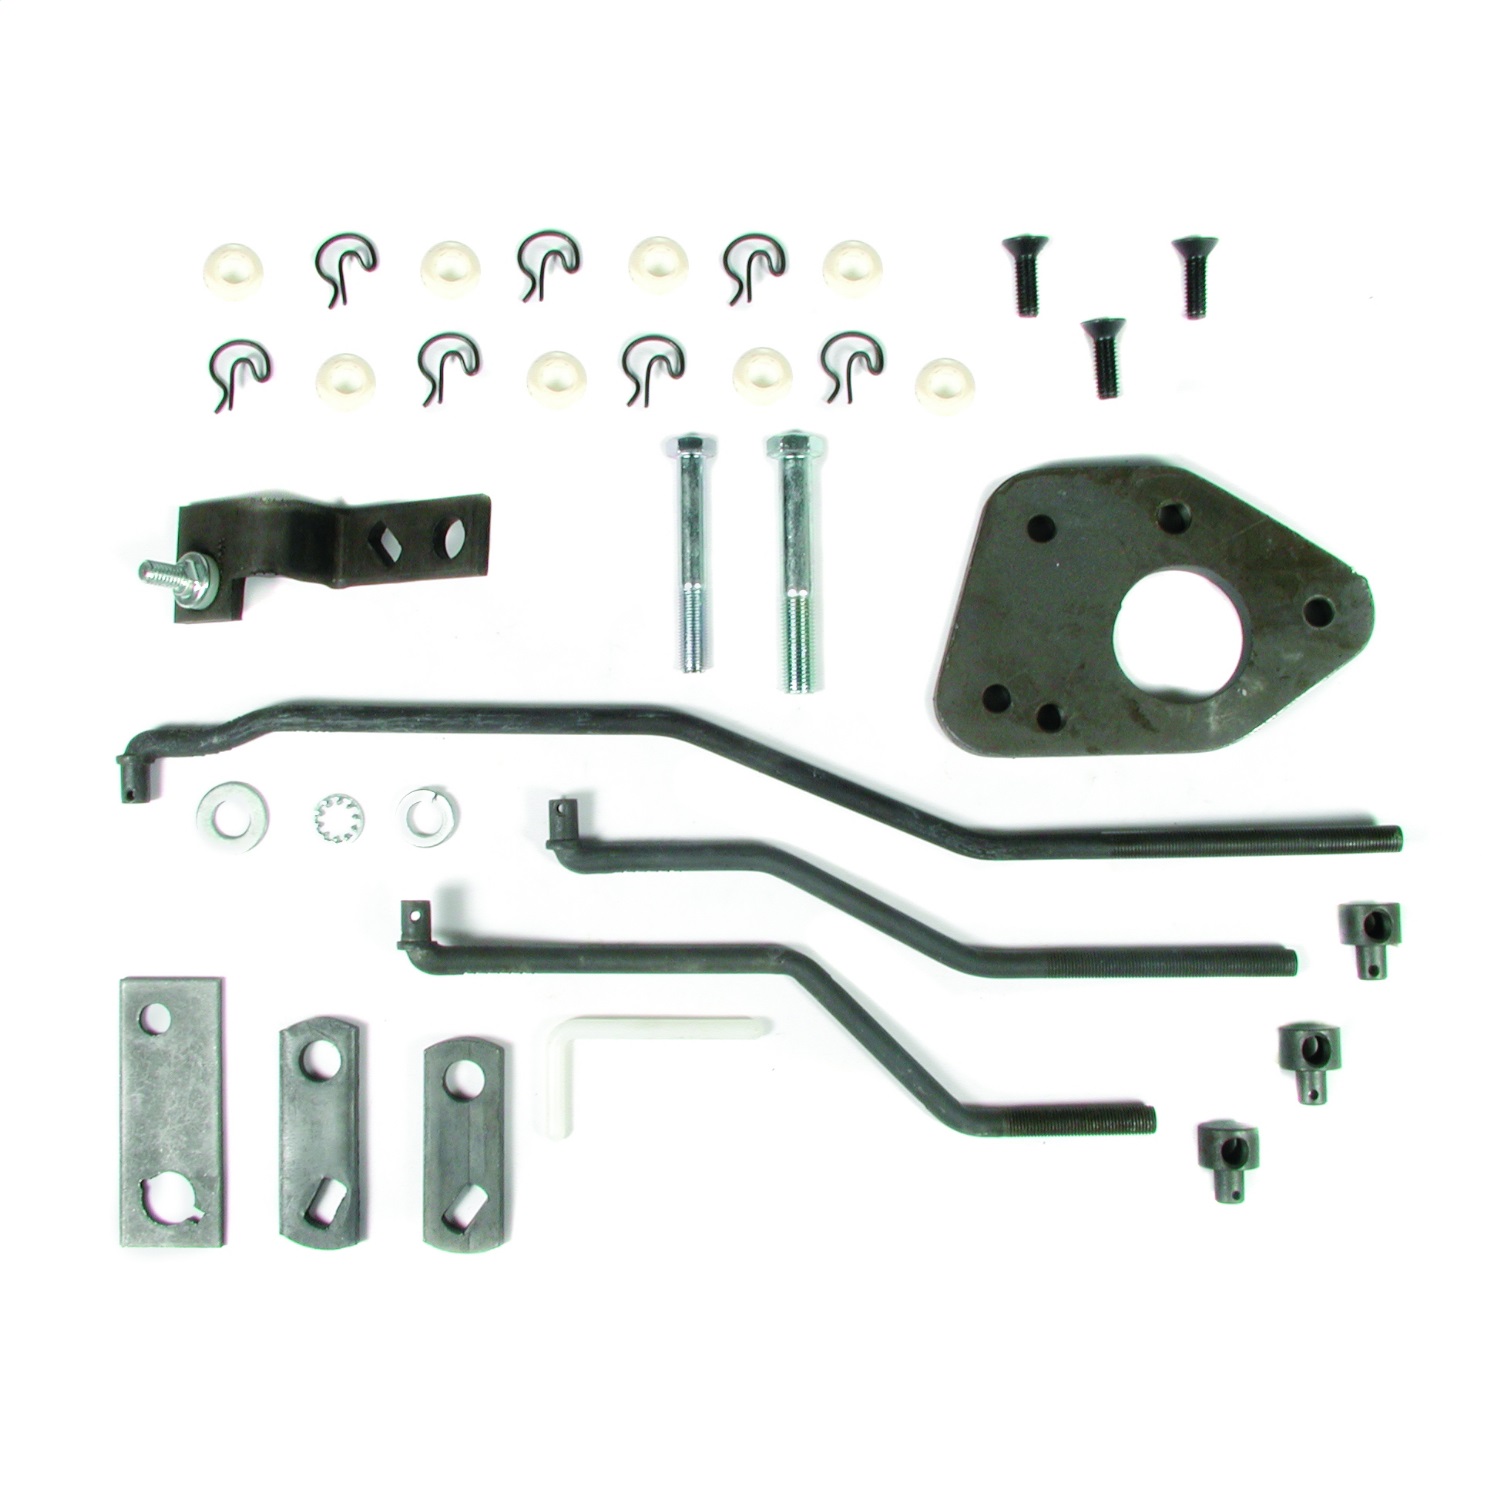 Hurst 3737638 Competition Plus Shifter Installation Kit